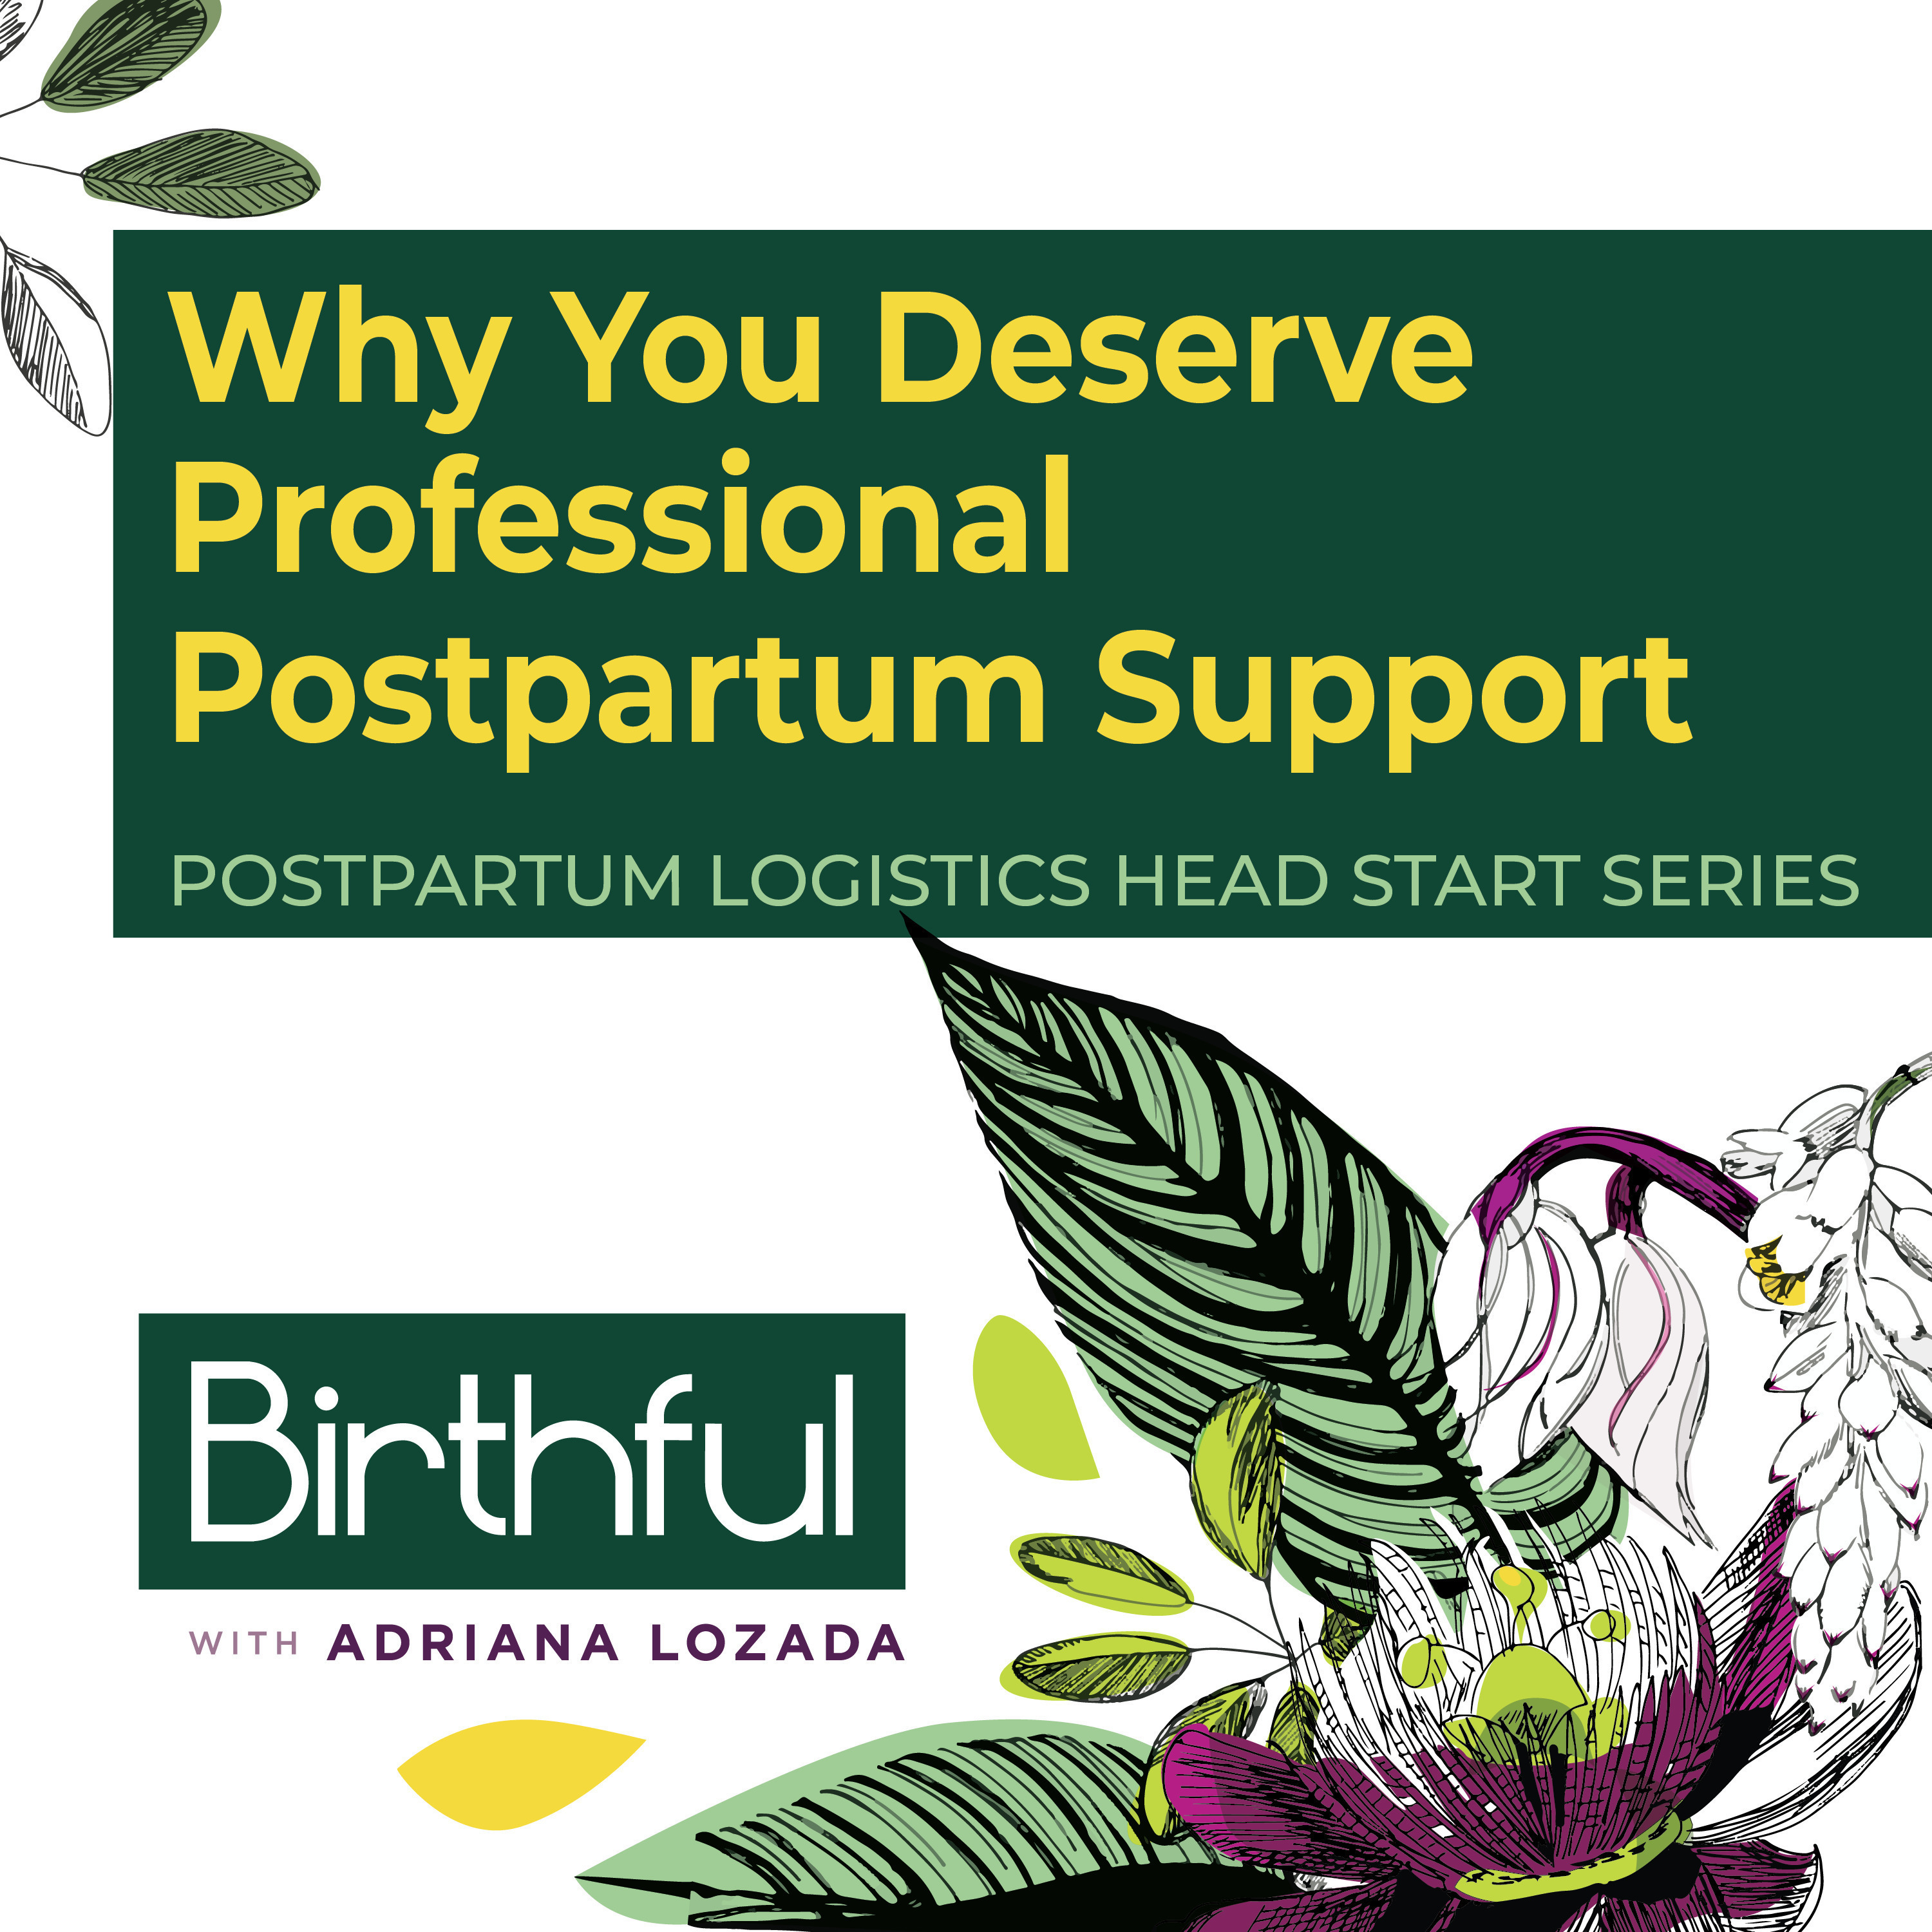 Why You Deserve Professional Postpartum Support (And How to Afford It!)